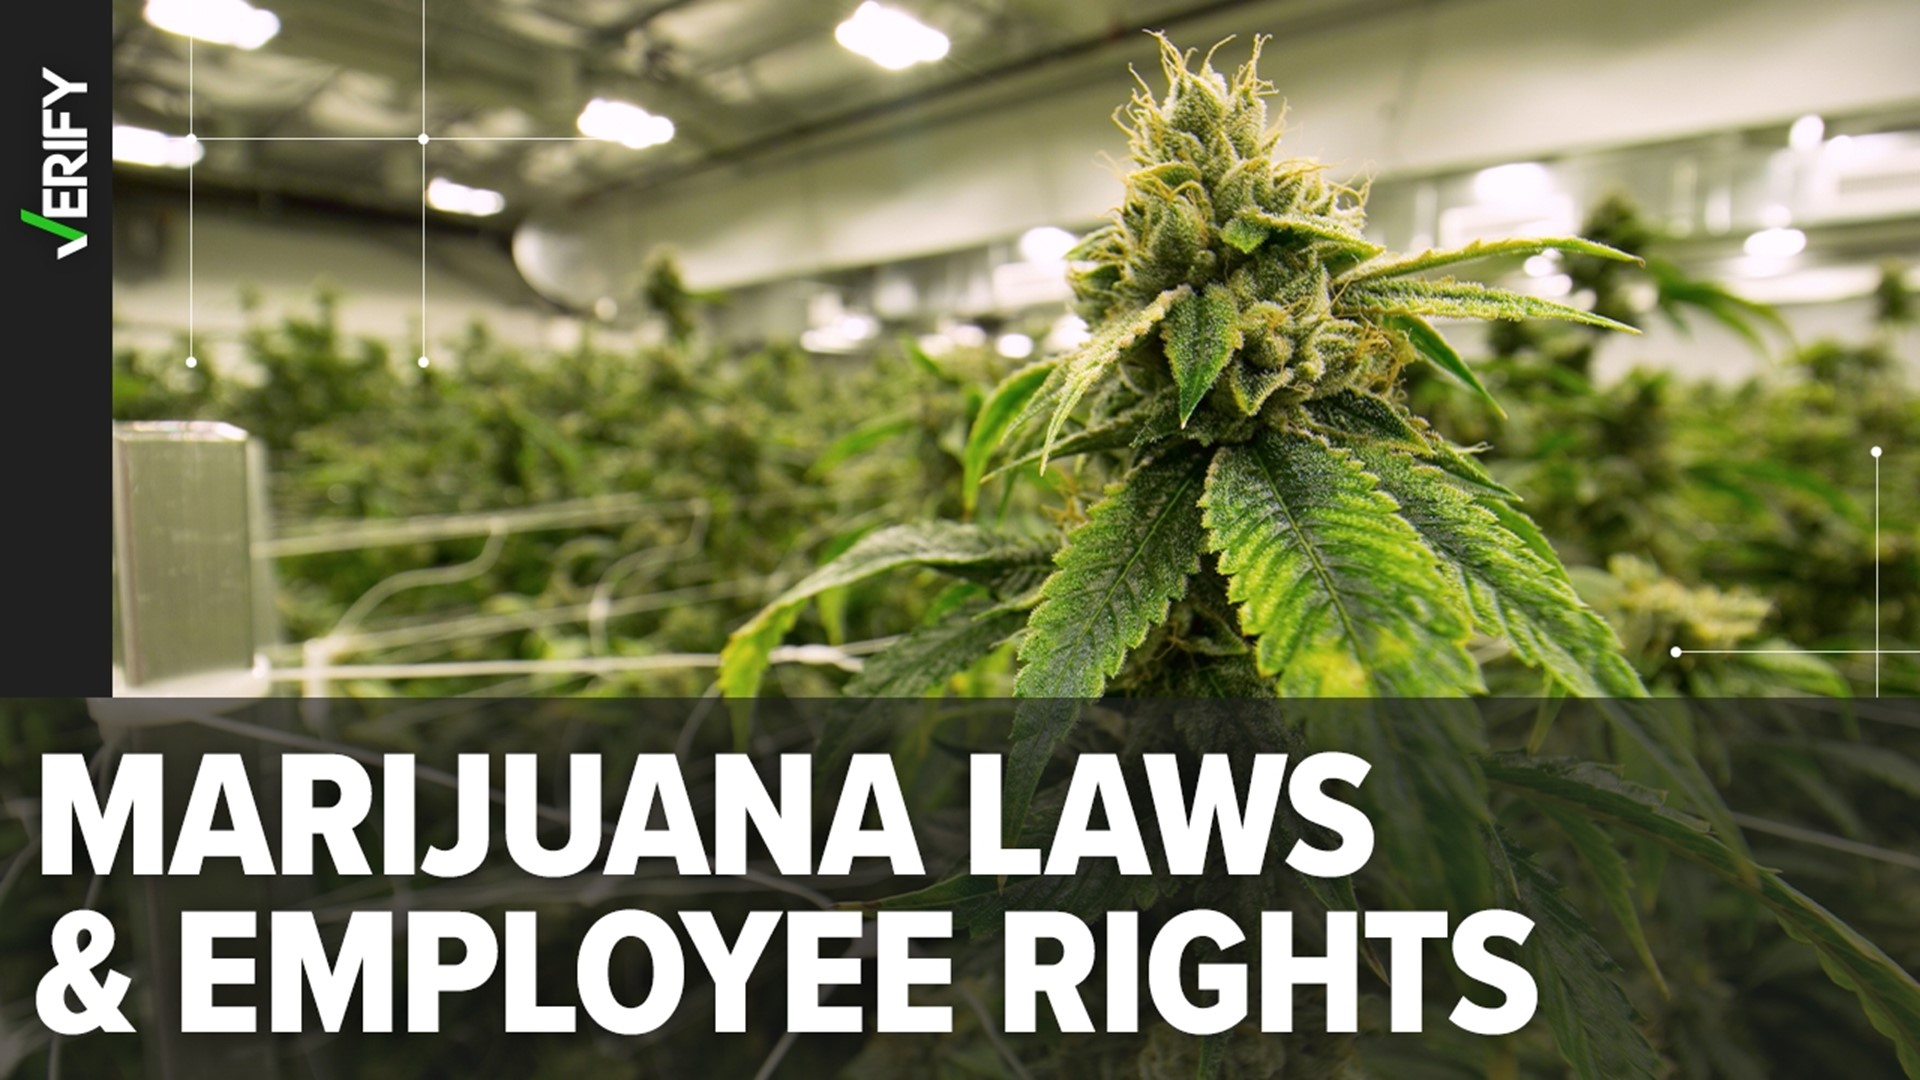 Some workers who use marijuana in states where recreational use has been legalized are protected from disciplinary action by their employers, while others are not.